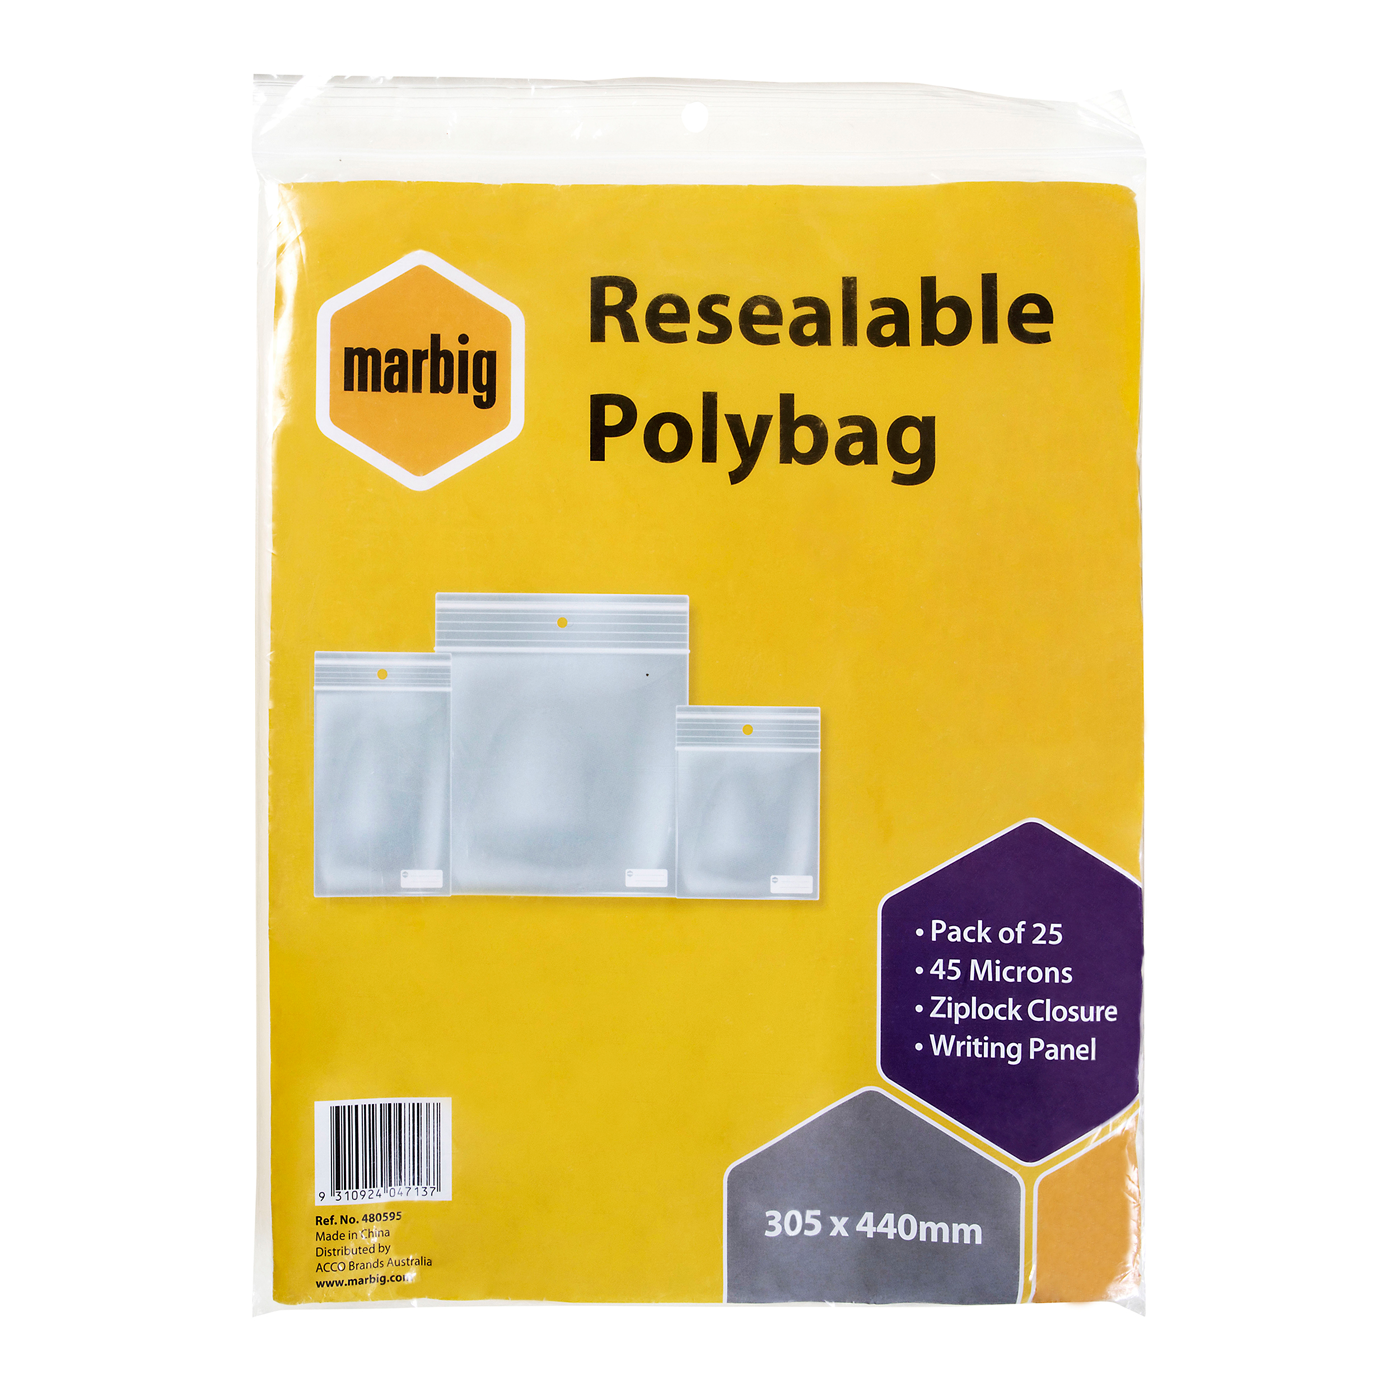 Marbig Resealable Polybag Zip Lock 305 x 440mm Writing Panel Pack of 25